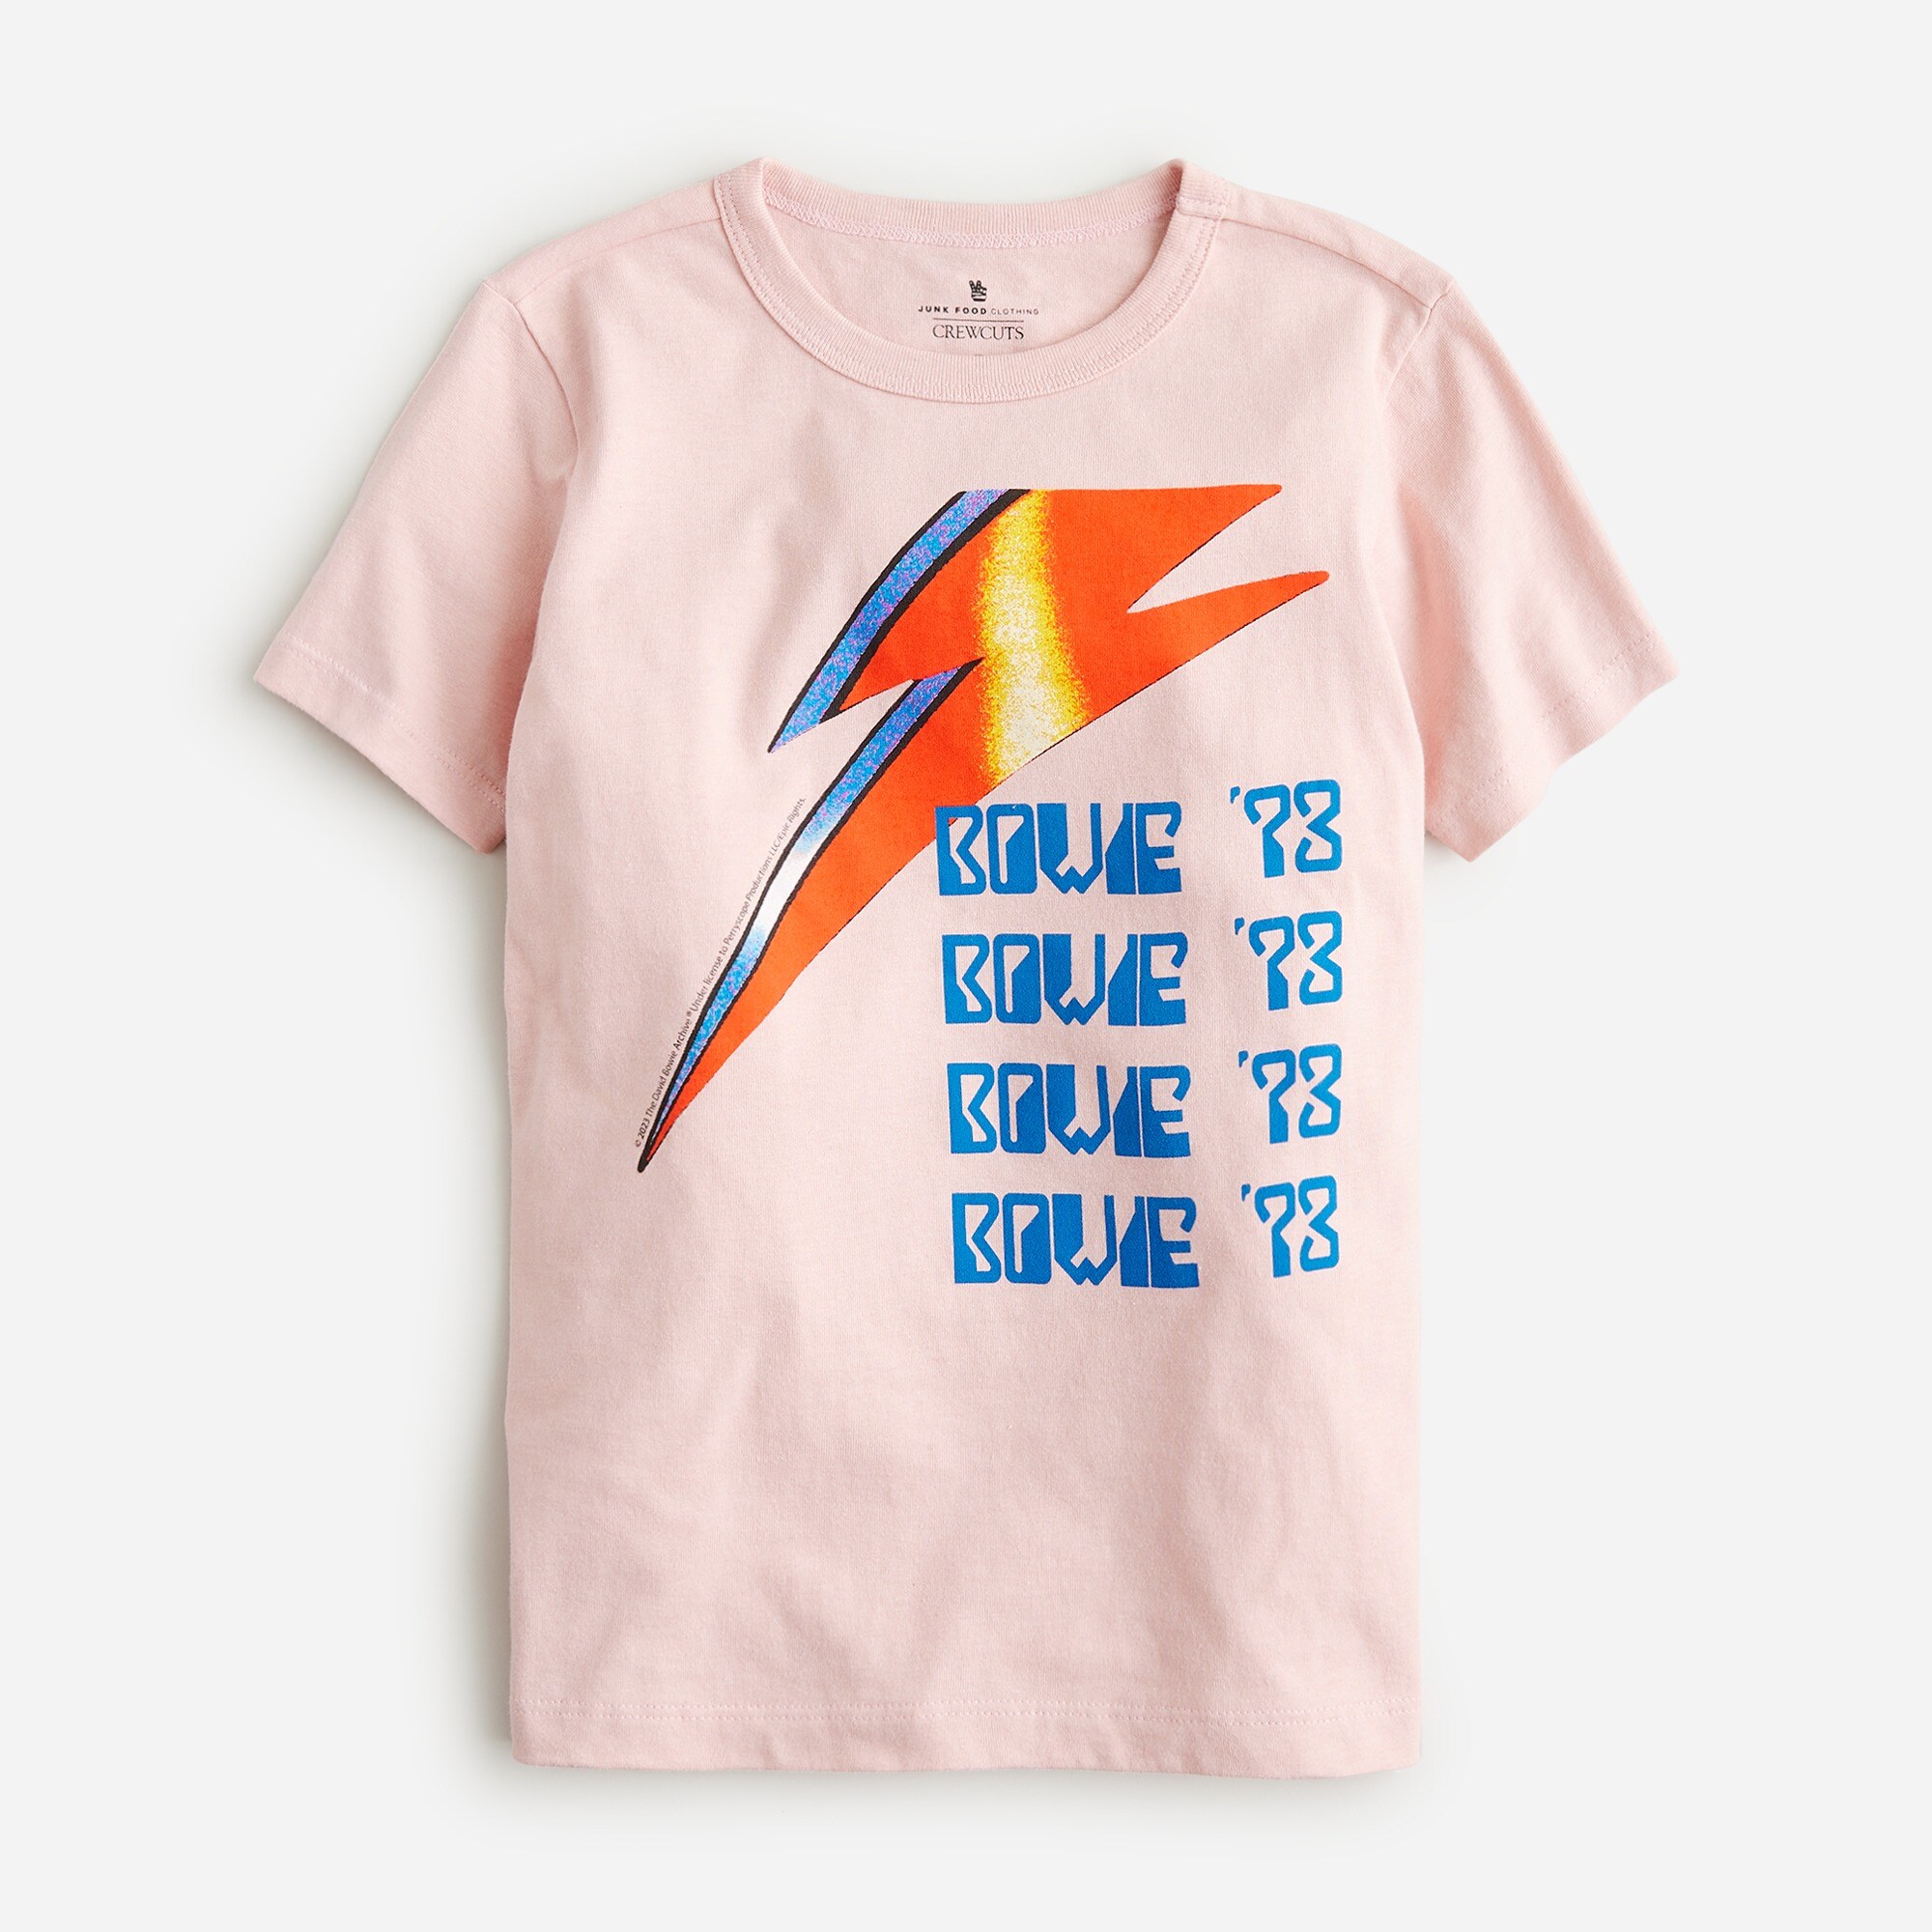  Kids' Junk Food Clothing David Bowie graphic T-shirt